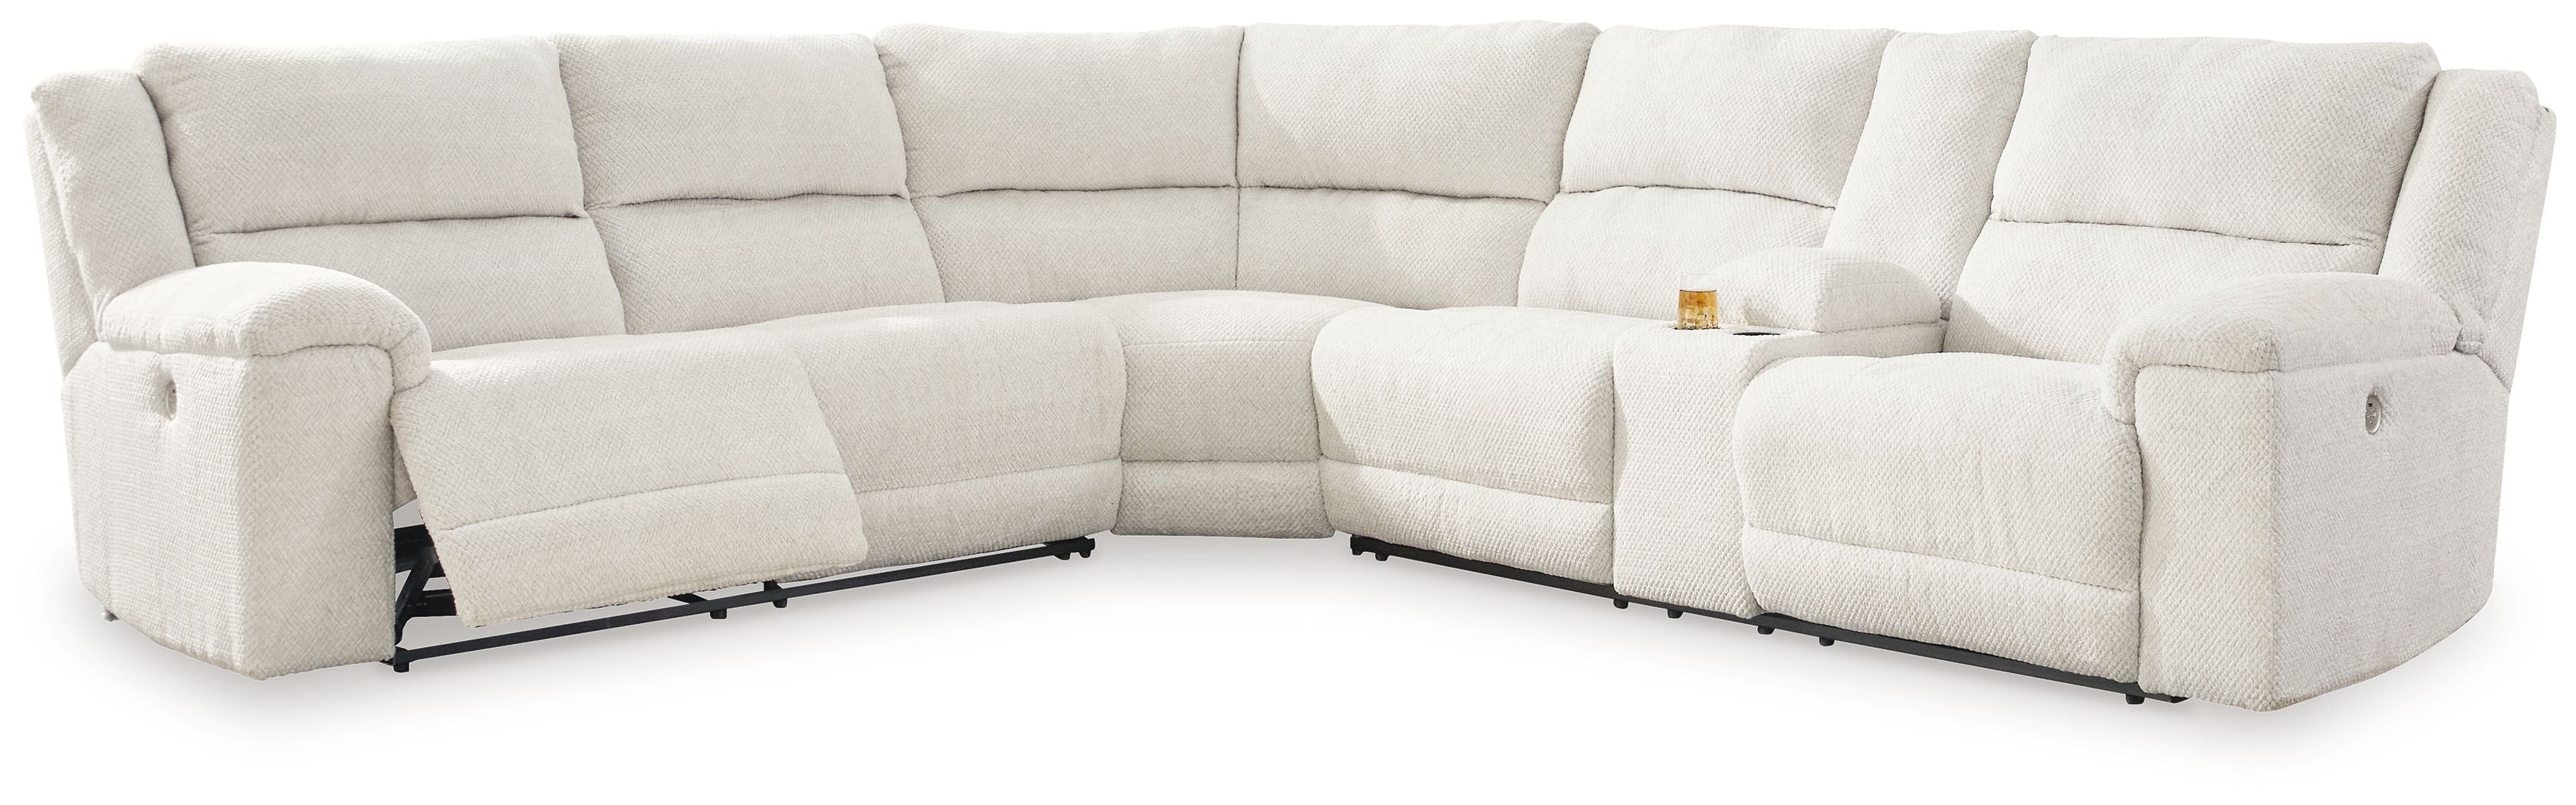 Keensburg White Power Reclining Sectional-Reclining Sectionals-American Furniture Outlet